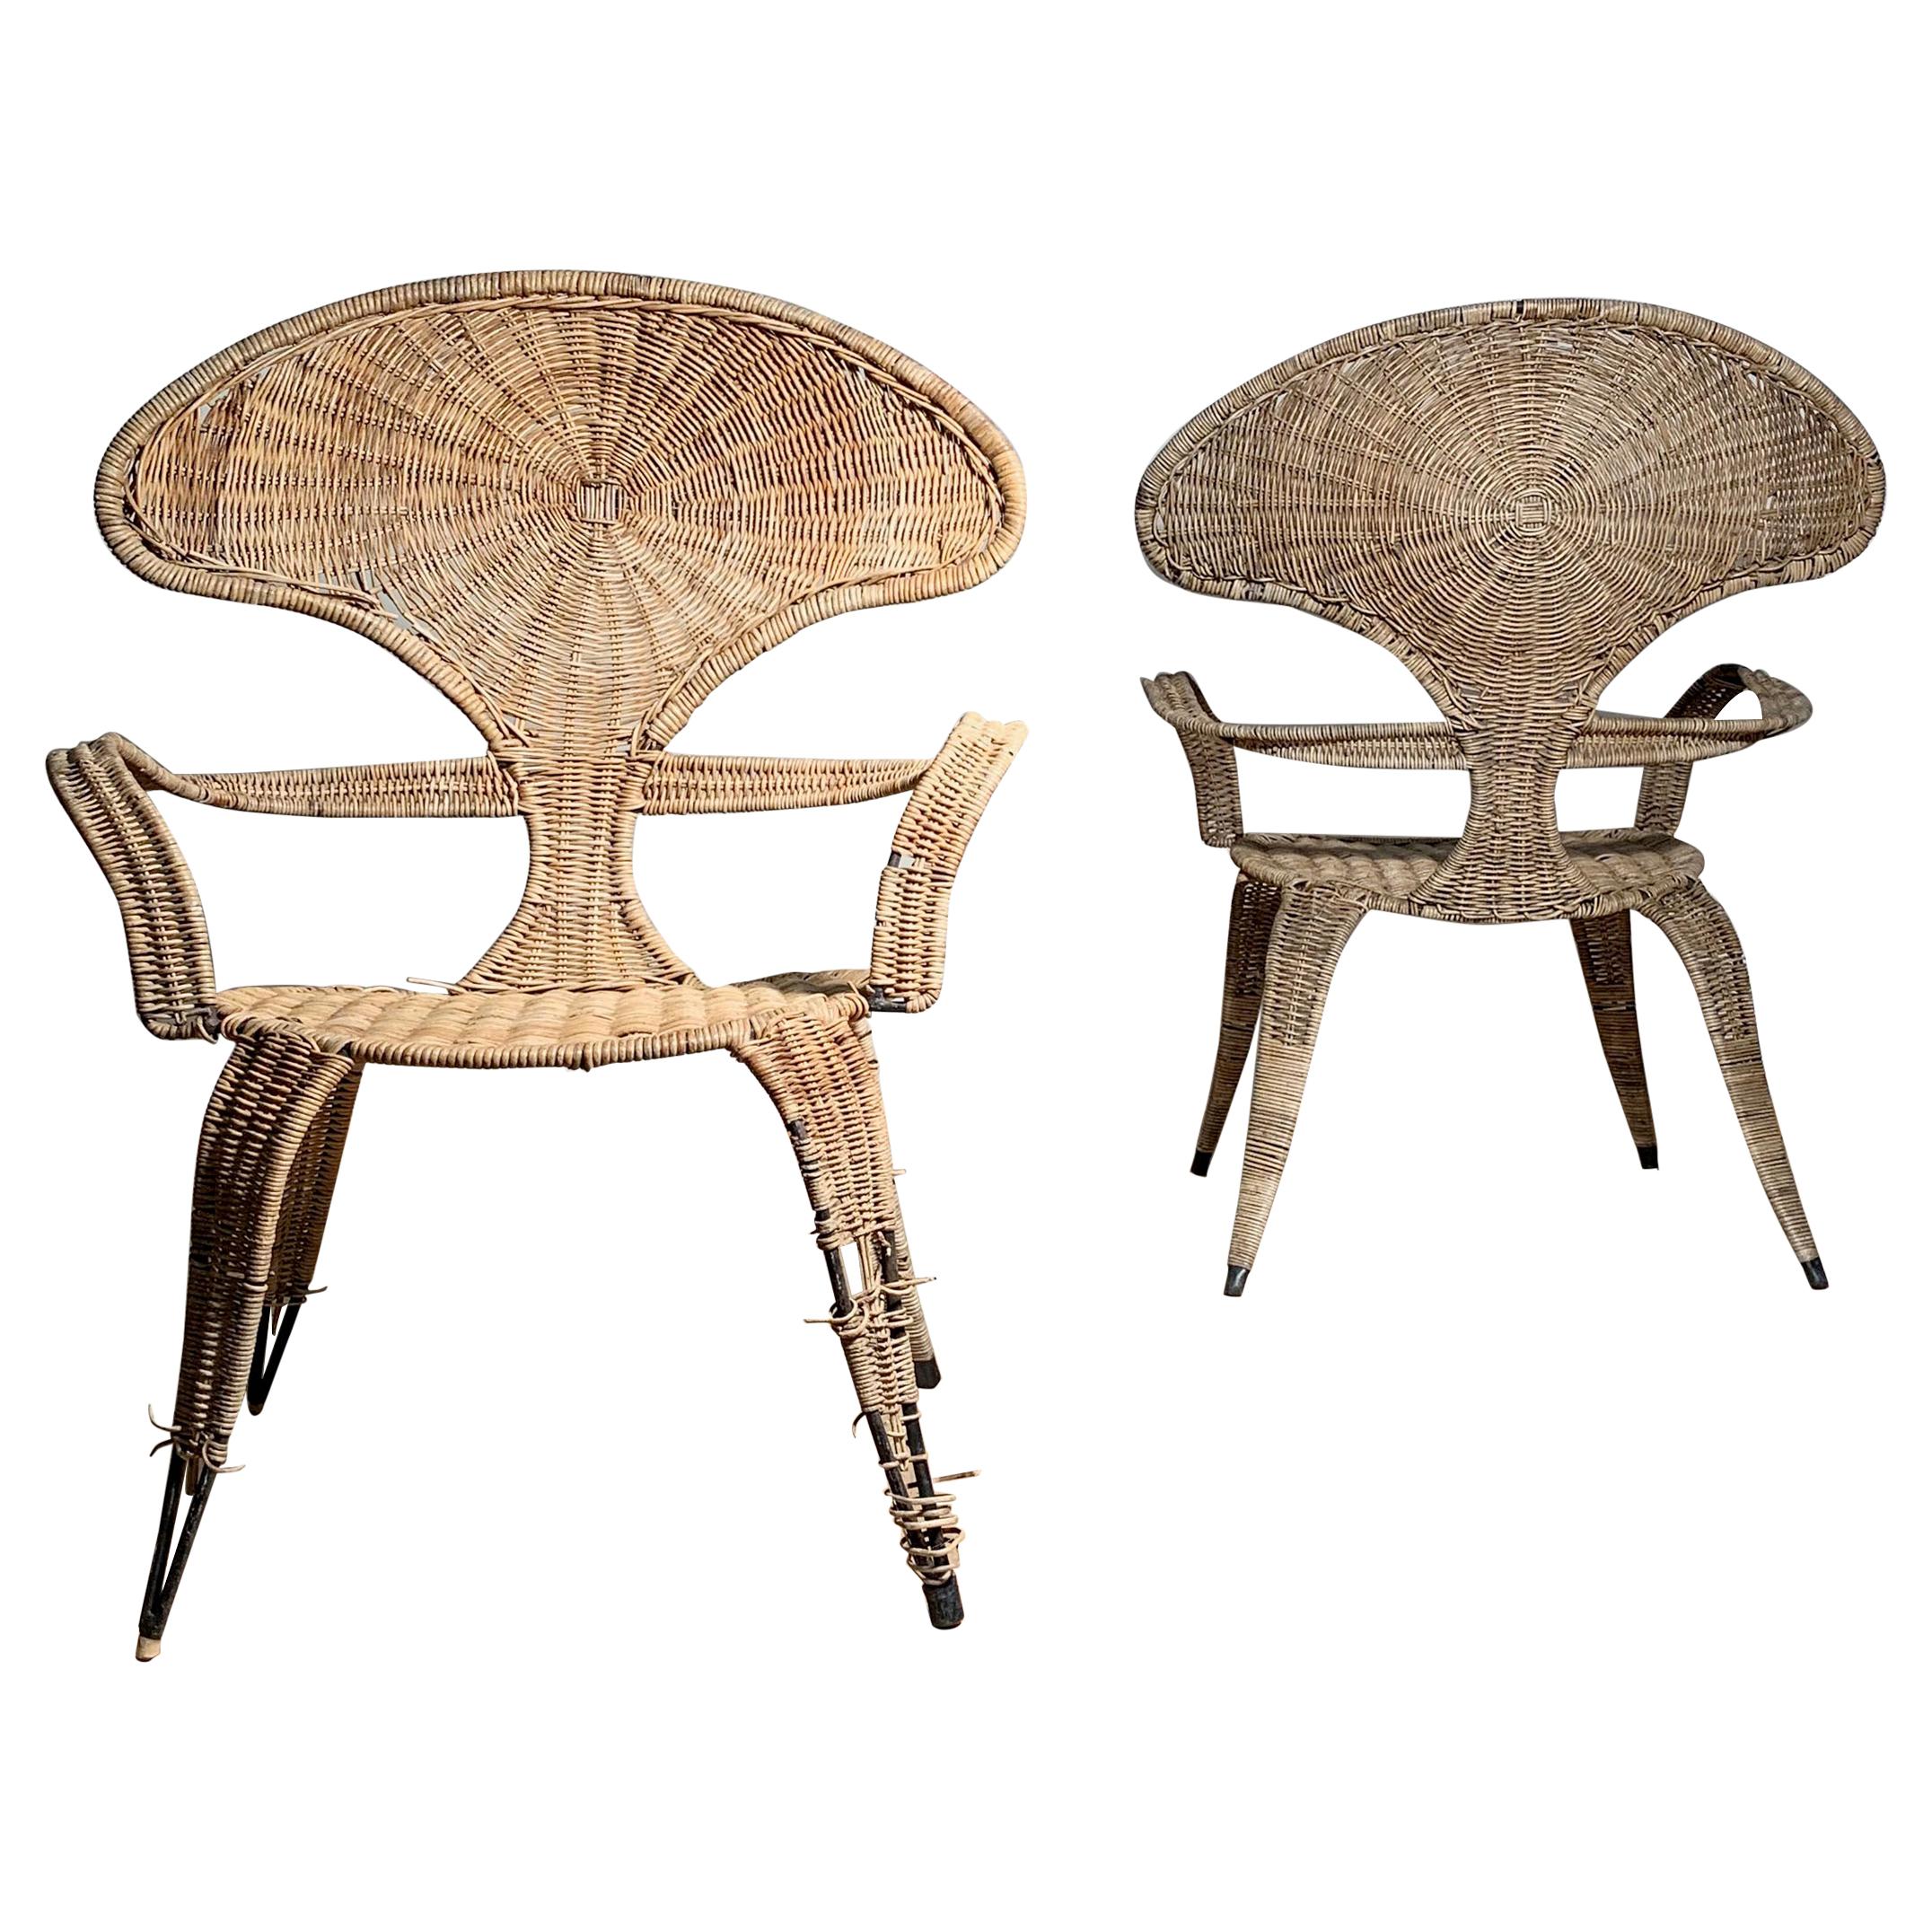 Tropi-Cal Danny Ho Fong and Miller Fong Garden Patio Pair of Chairs For Sale